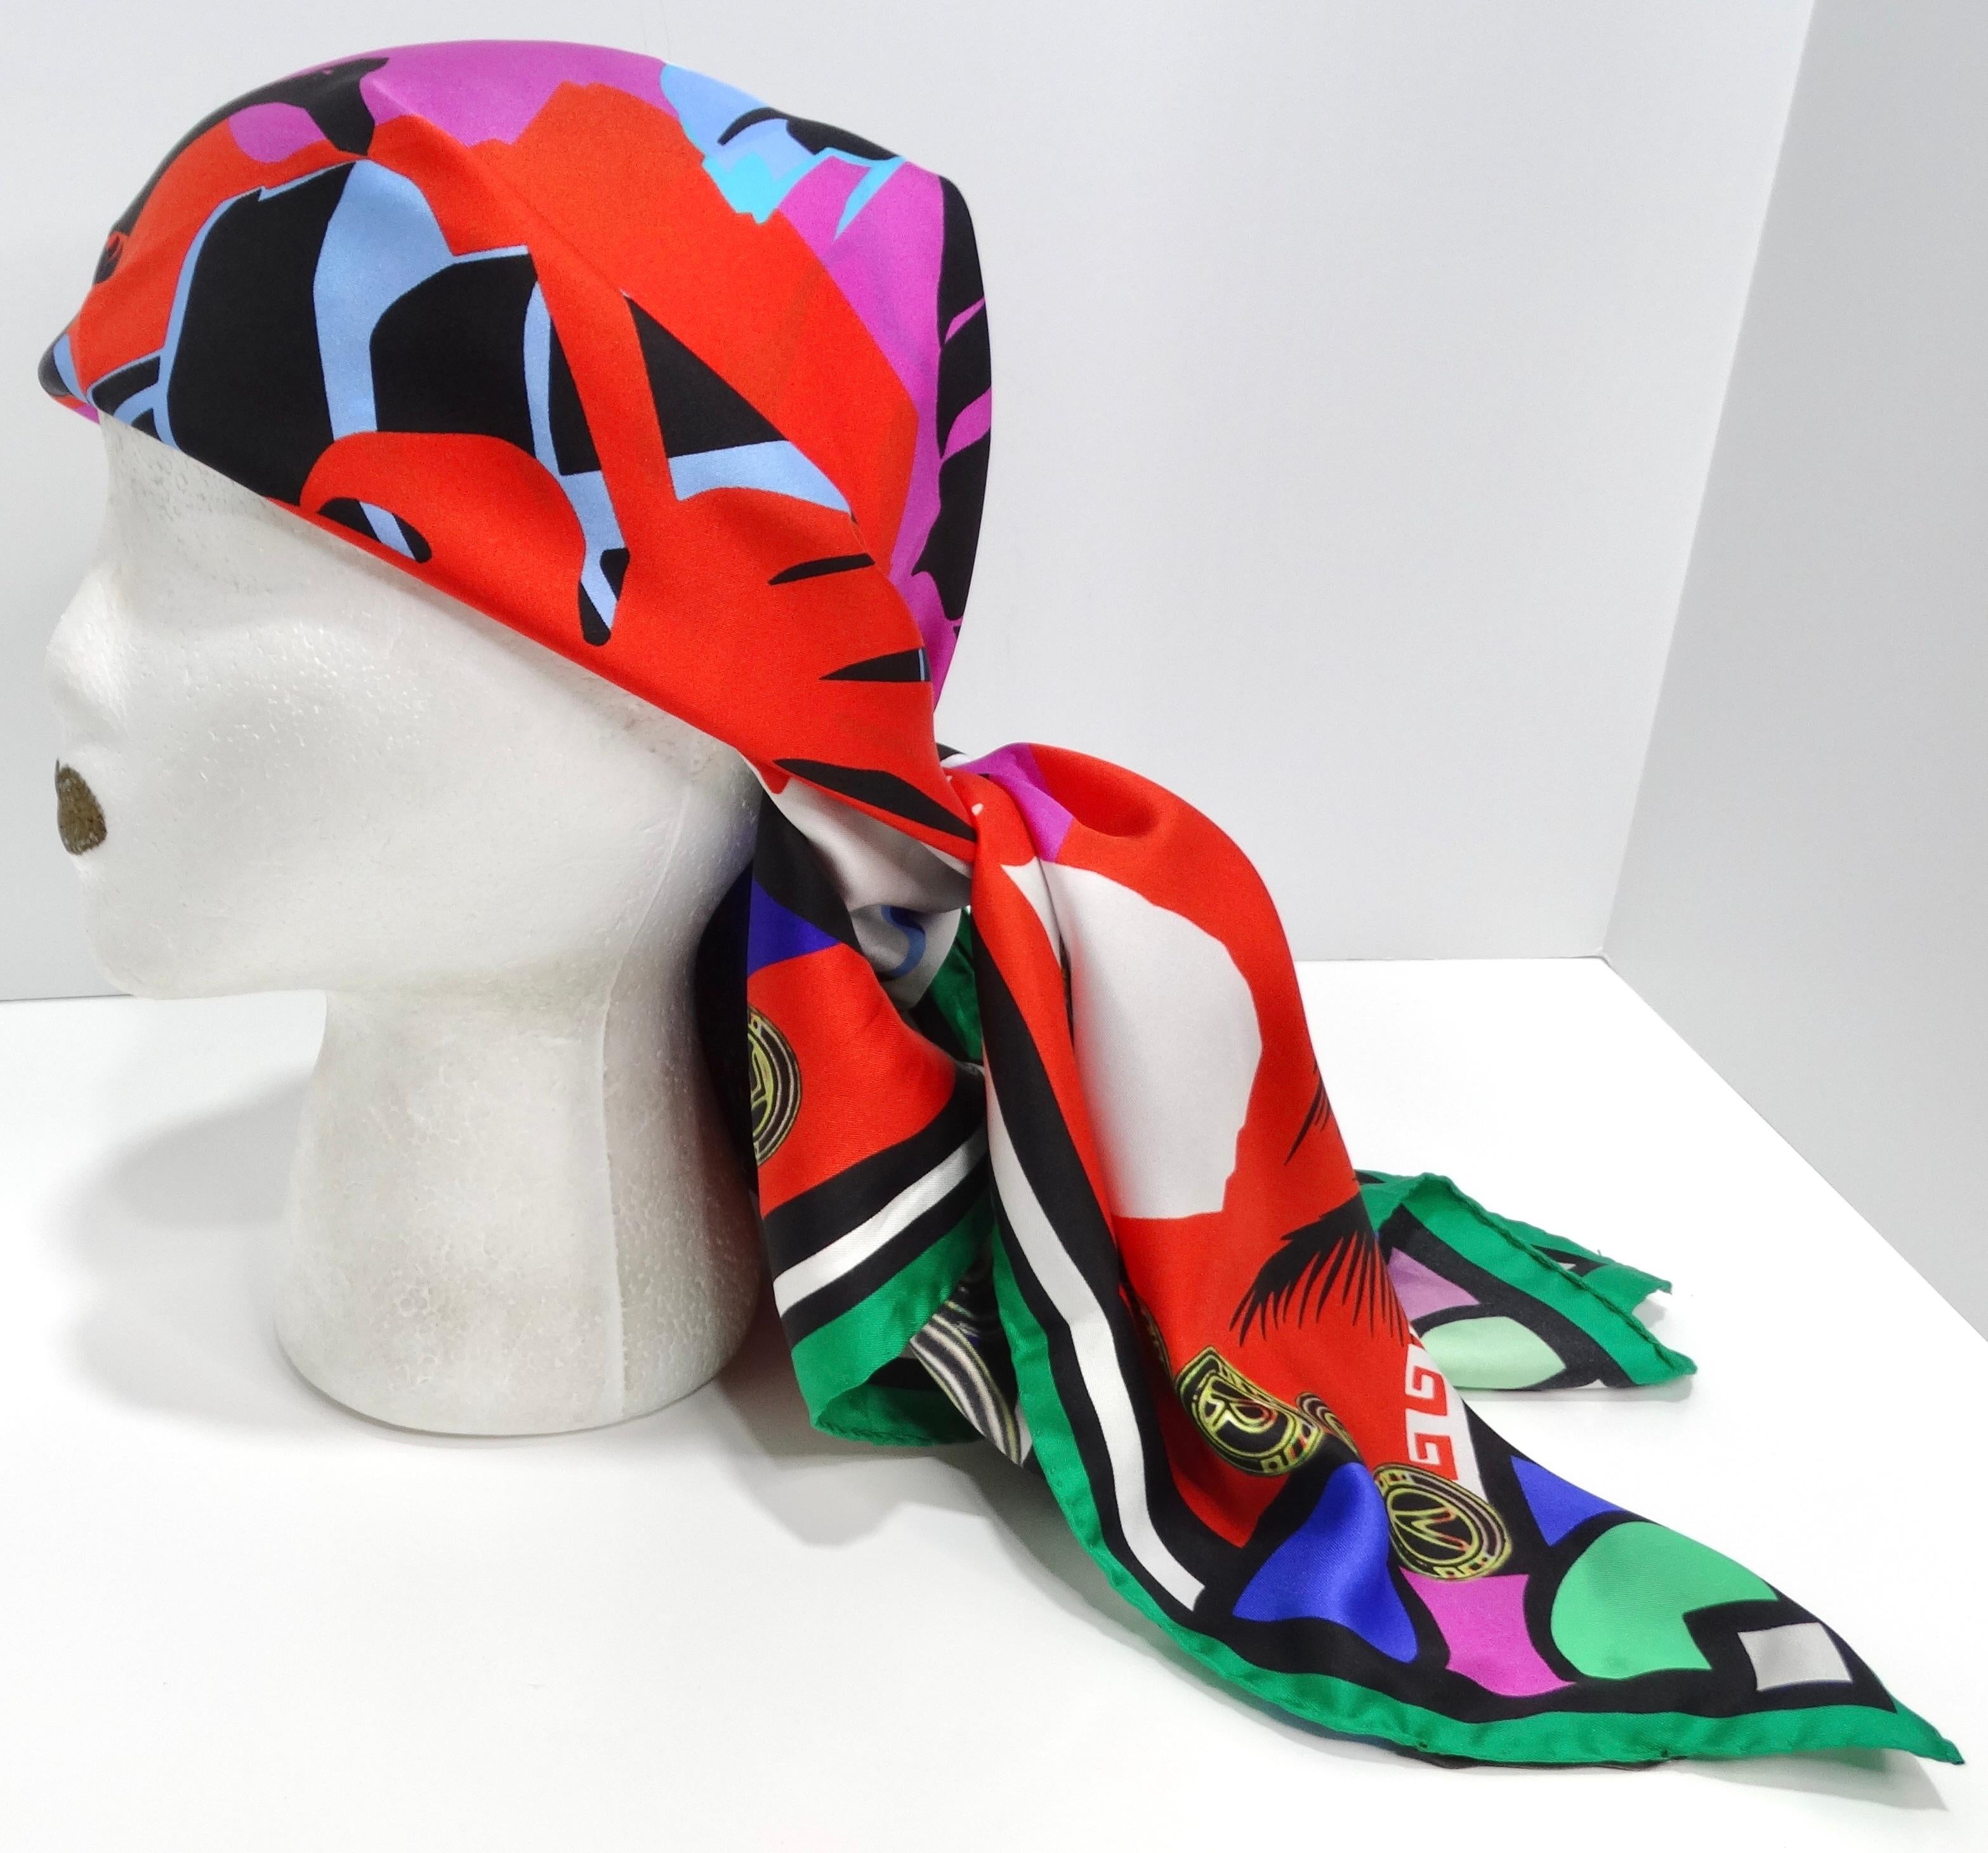 Introducing the Versace Multicolor Silk Printed Scarf, a vibrant and iconic accessory that captures the essence of luxury and glamour. Crafted from luxurious silk, this classic Versace scarf features a bold multicolor print inspired by the vibrant